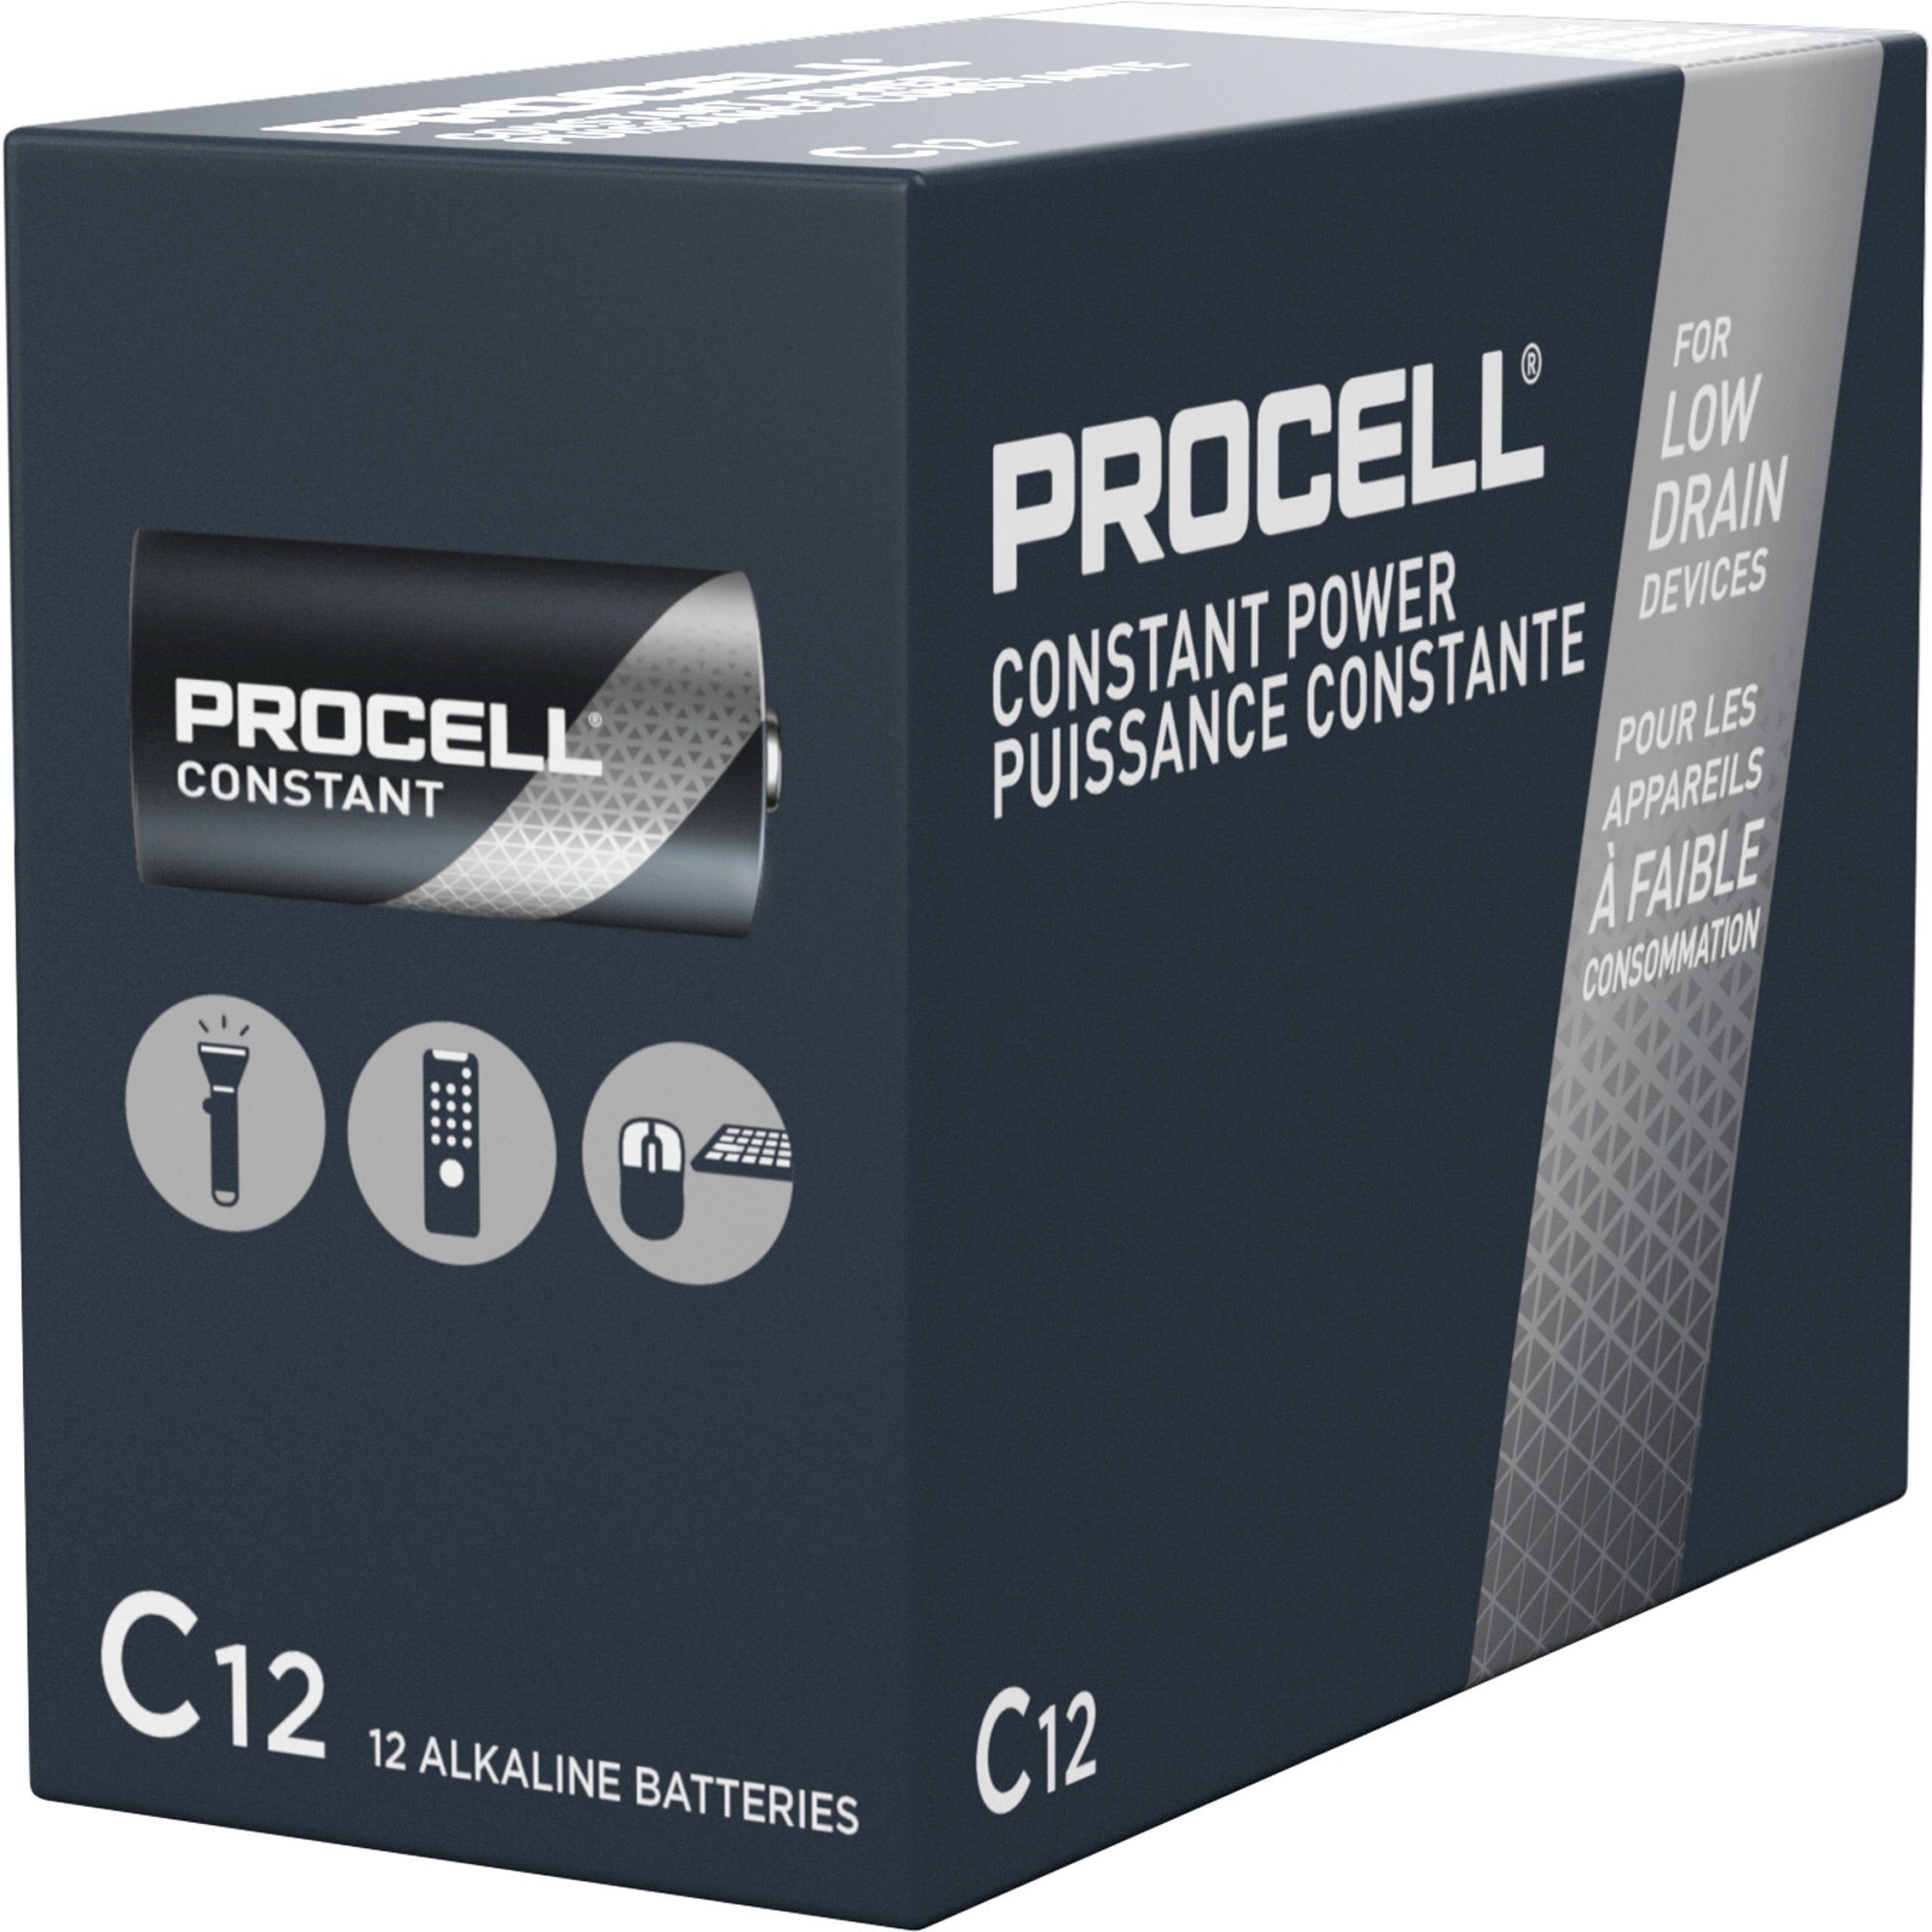 duracell-procell-alkaline-c-battery-boxes-of-12-for-multipurpose-c-7000-mah-15-v-dc-72-carton_durpc1400ct - 2